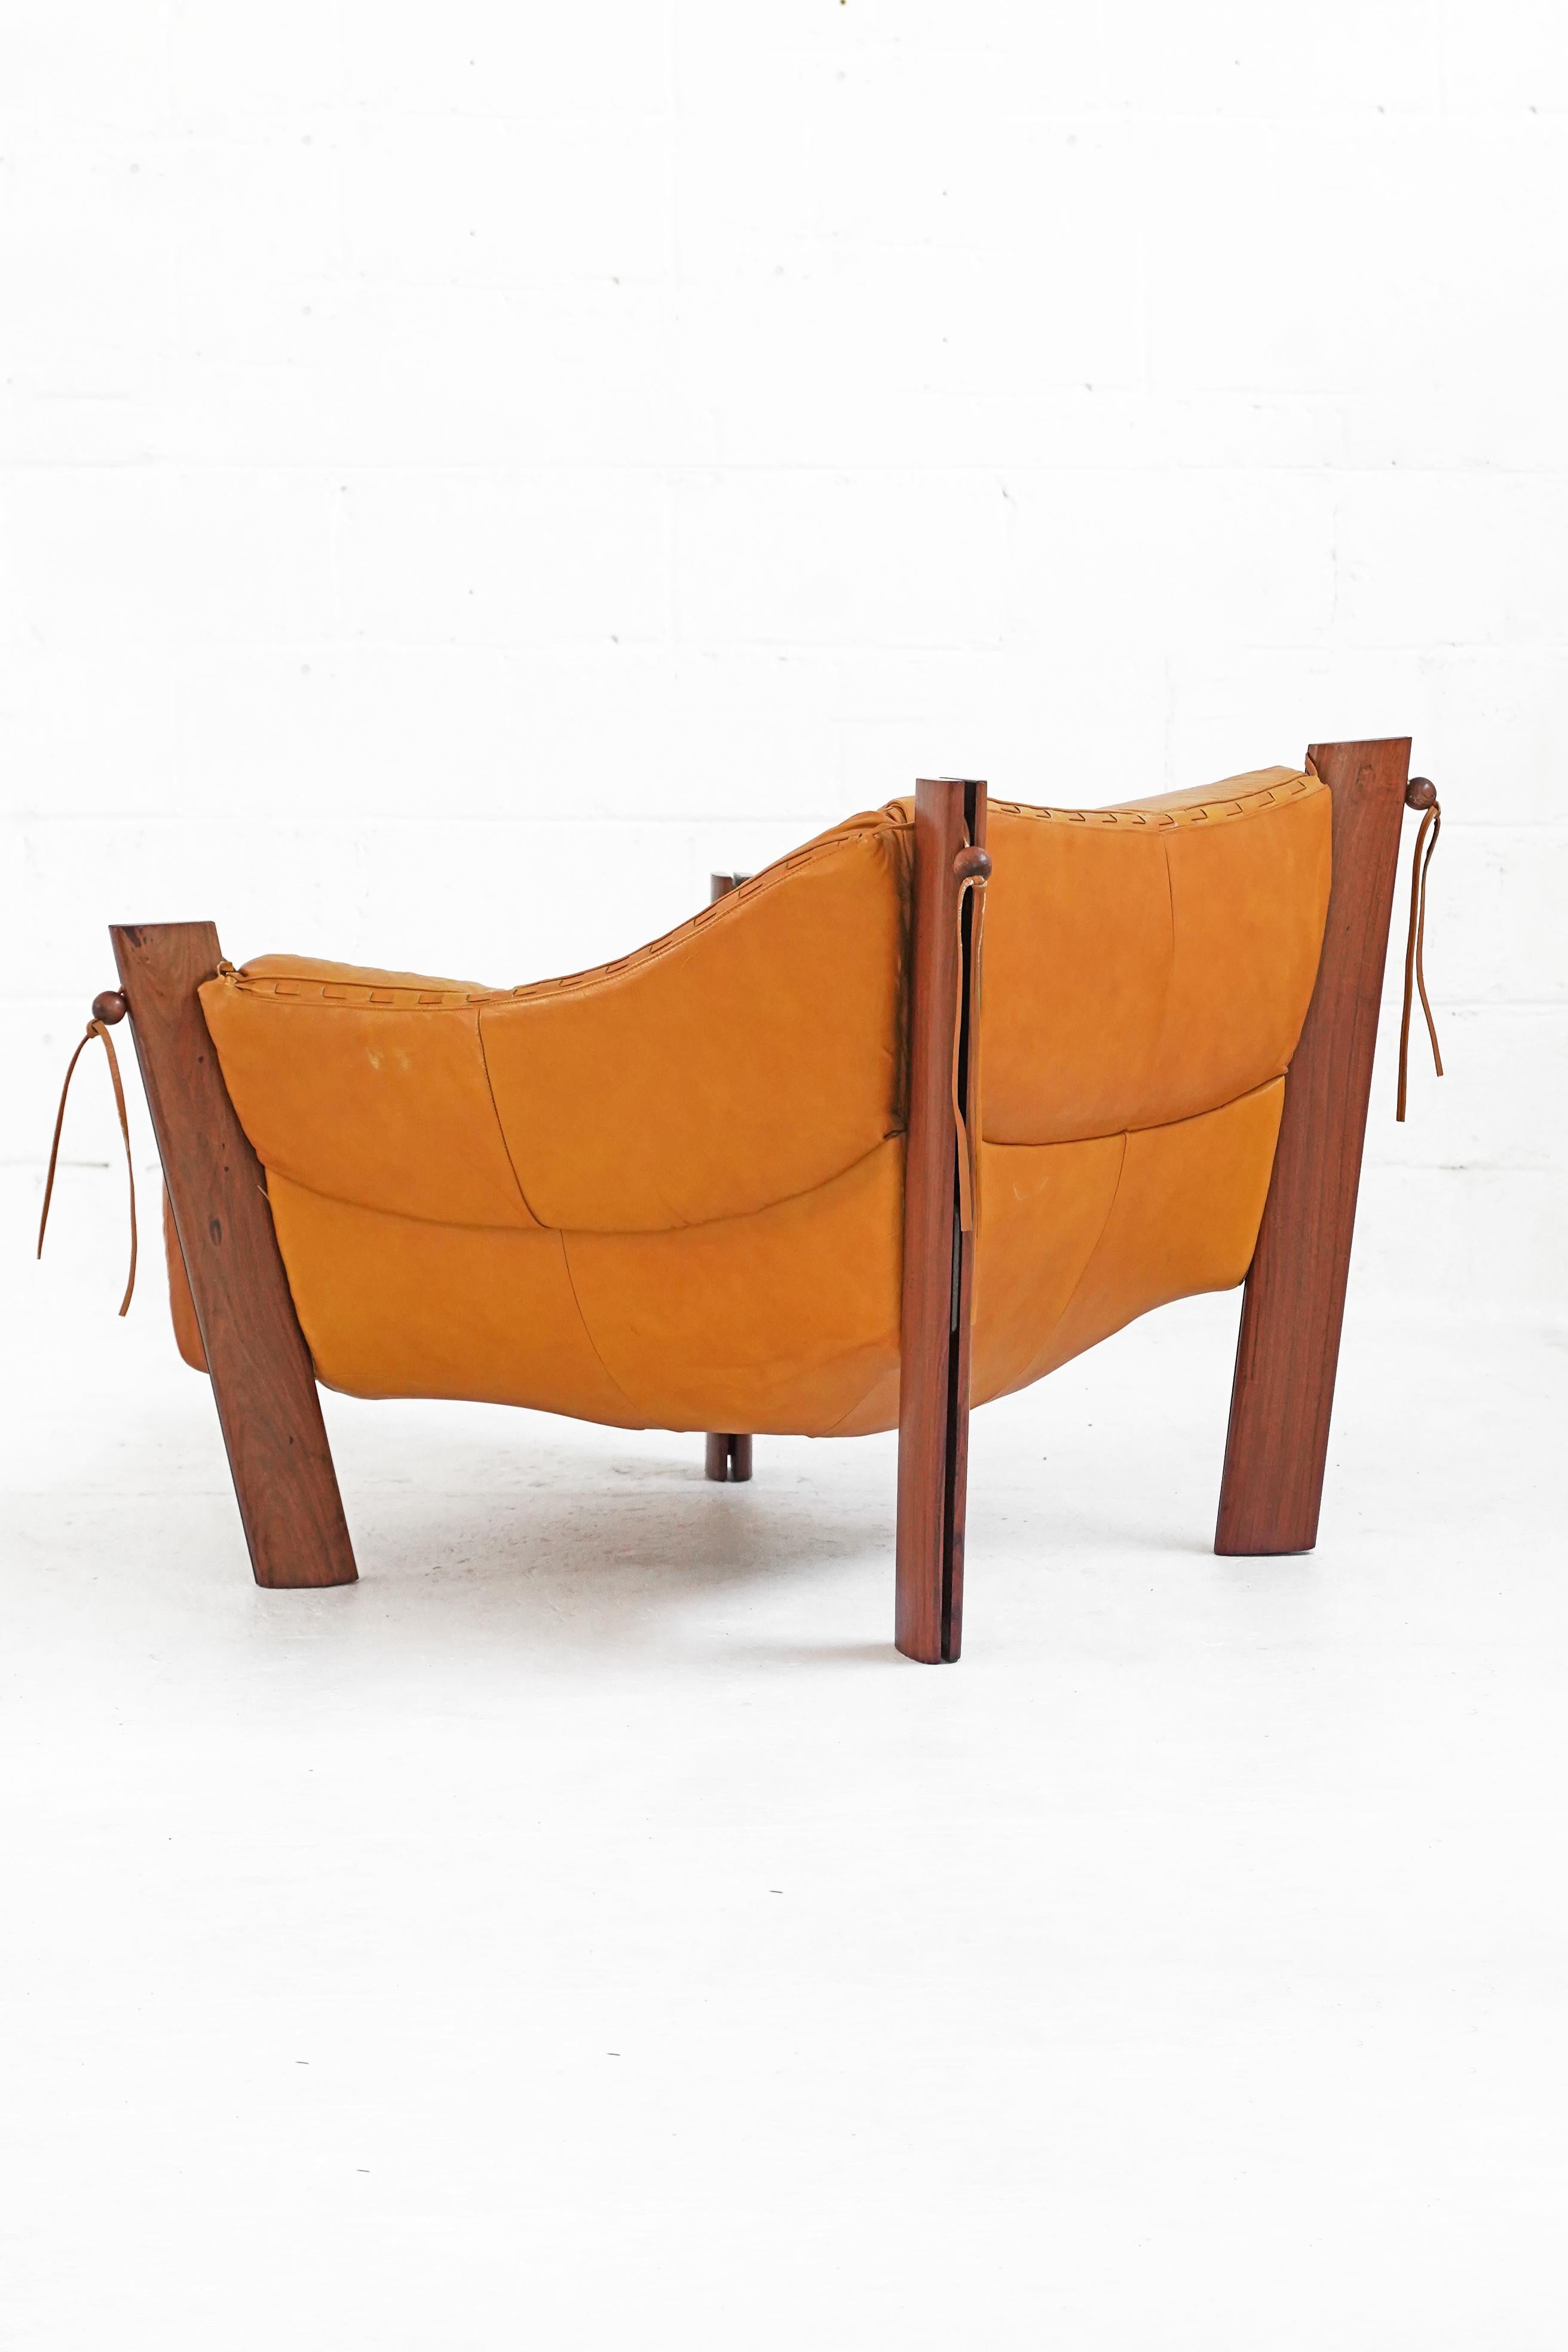 1960-1979 production. Original leather upholstery in a Tuscany Yellow, with beautiful patina, as photographed. Both the MP-211 lounge chair and matching sofa date to the 60s-70s.

Measurements:
Sofa 78